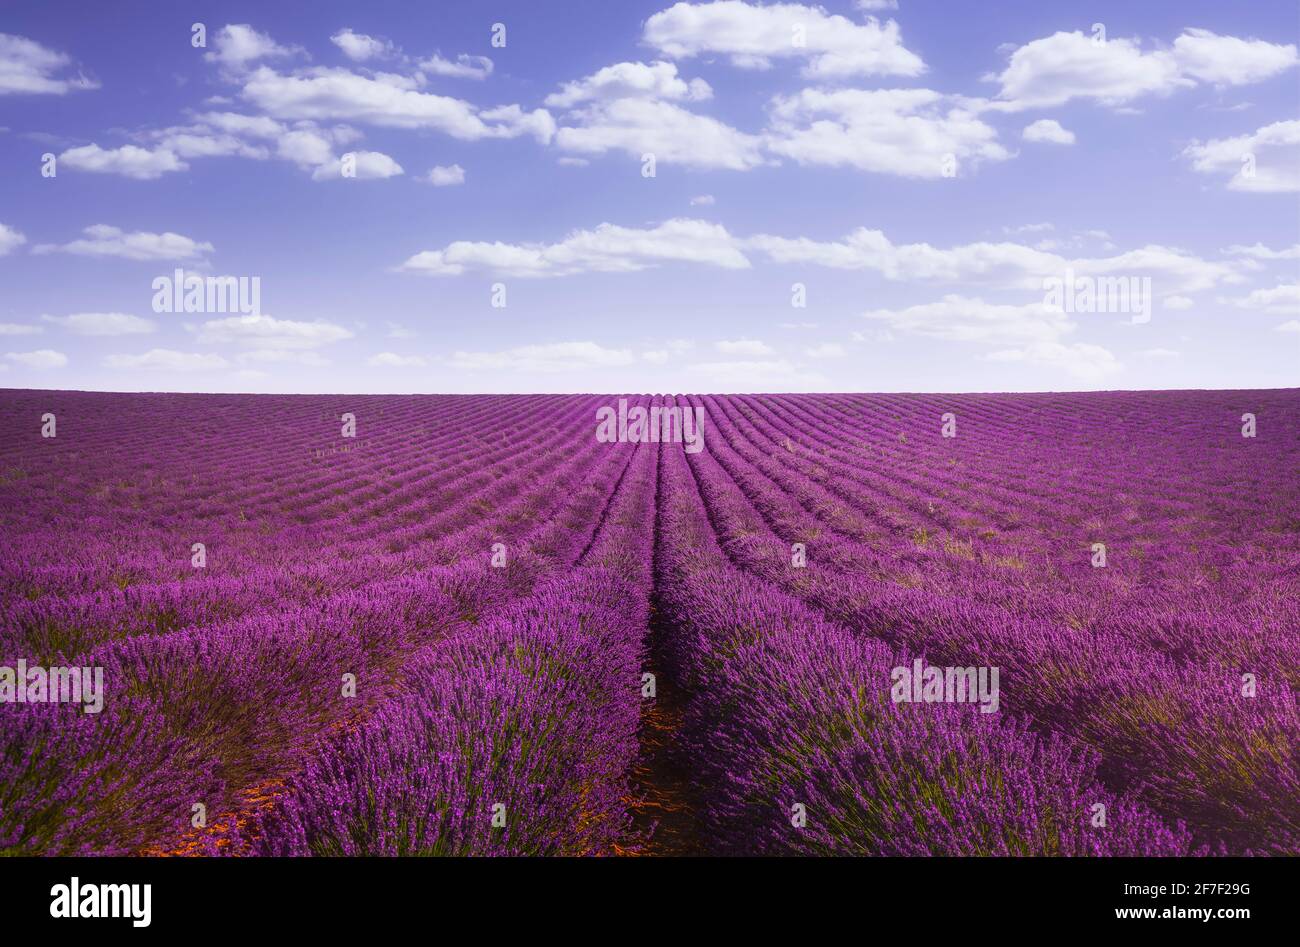 Lavender flowers blooming fields abstract landscape. Valensole, Provence, France, Europe. Stock Photo